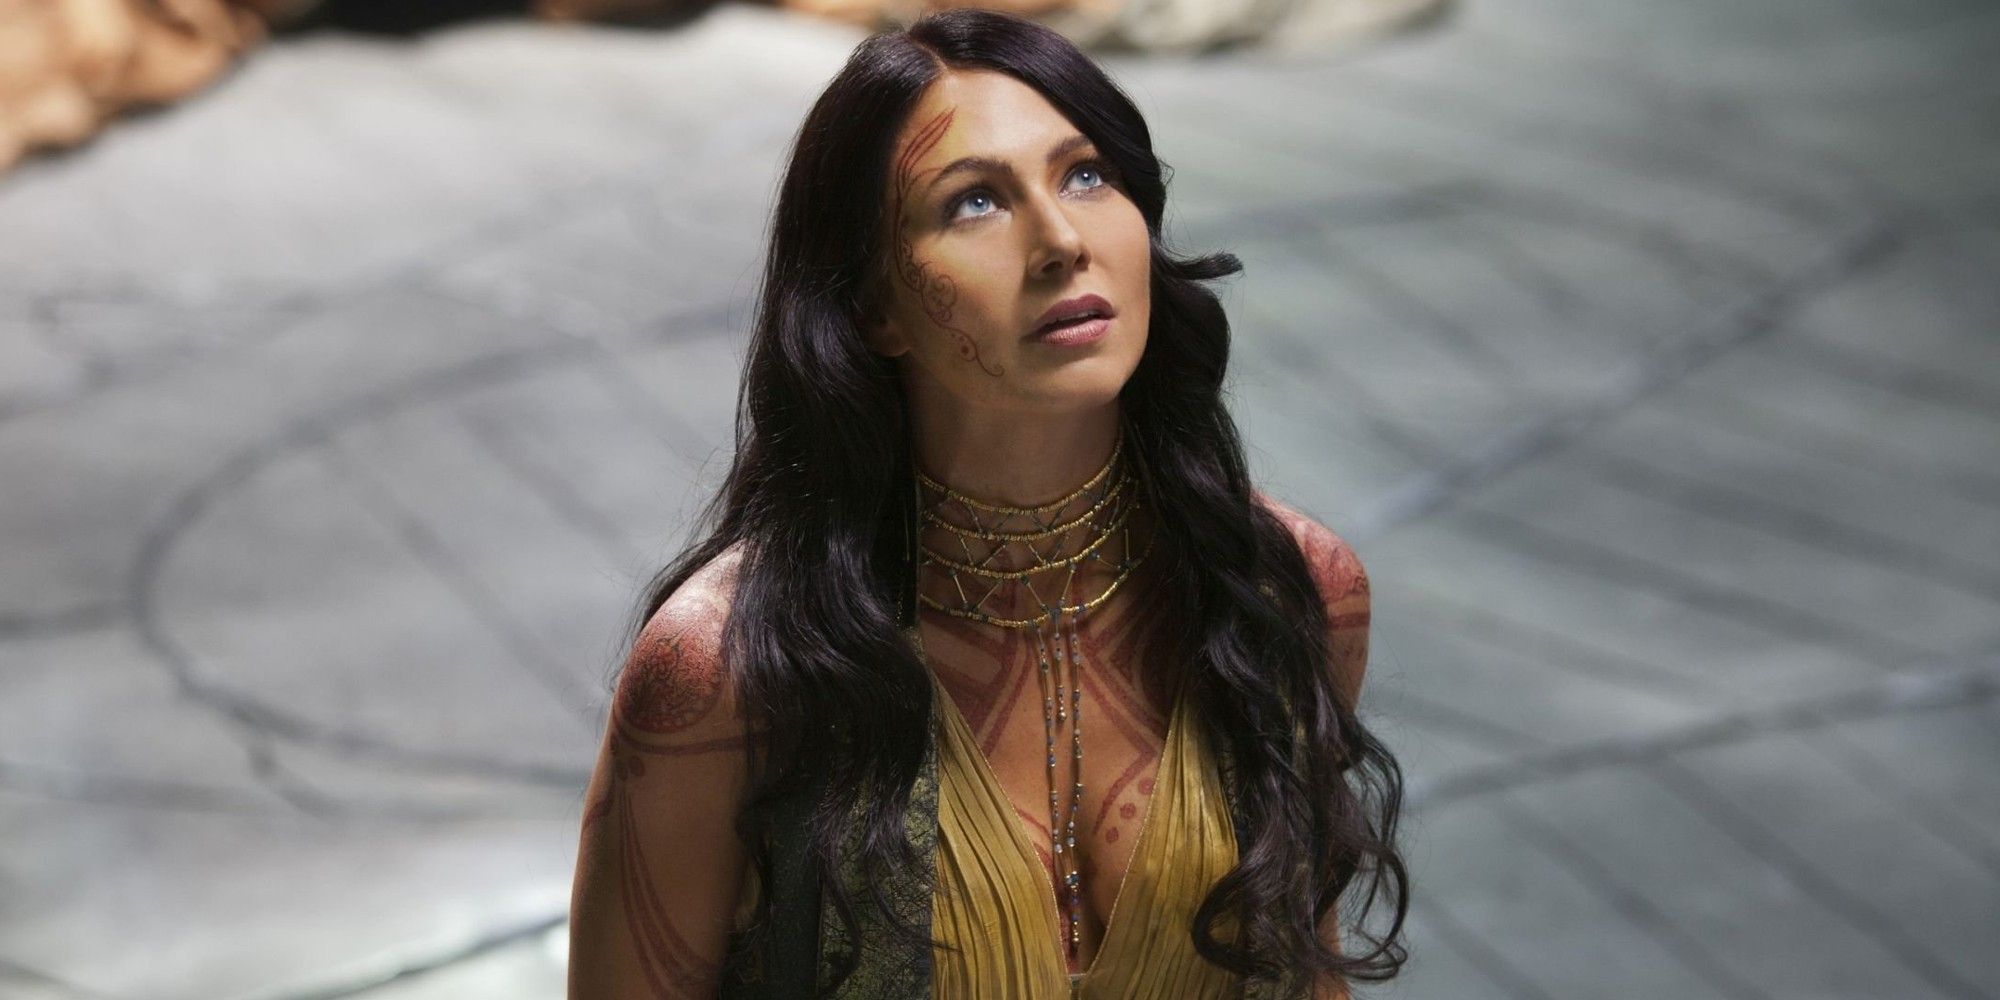 John Carter Sequel Titles & Synopses Revealed After First Movie Bombed